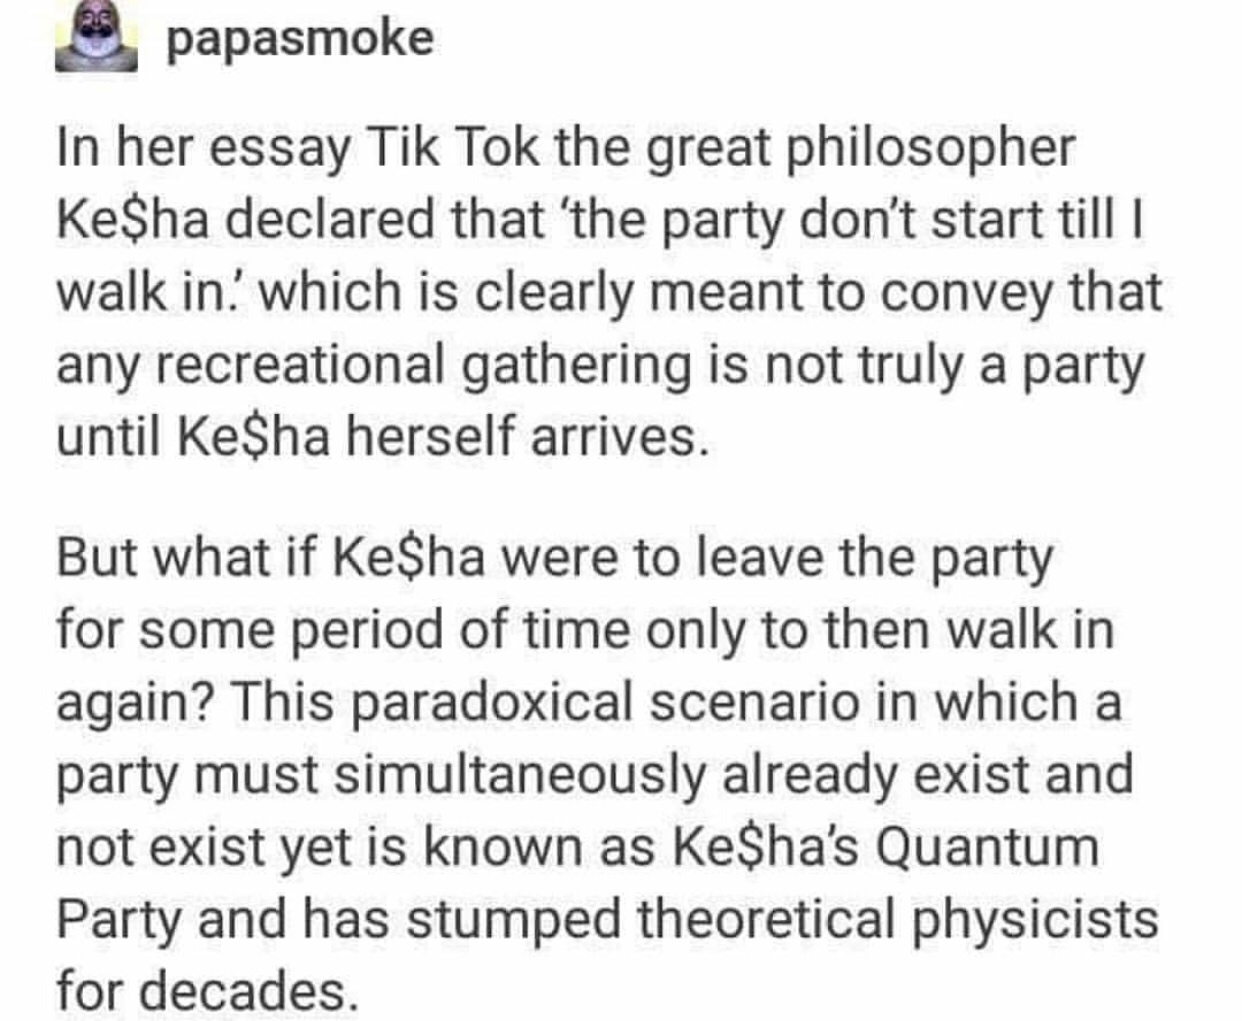 papasmoke In her essay Tik Tok the great philosopher Ke$ha declared that the party don't start till i walk in, which is clearly meant to convey that any recreational gathering is not truly a party until Ke$ha herself arrives. But what if Ke$ha were to…